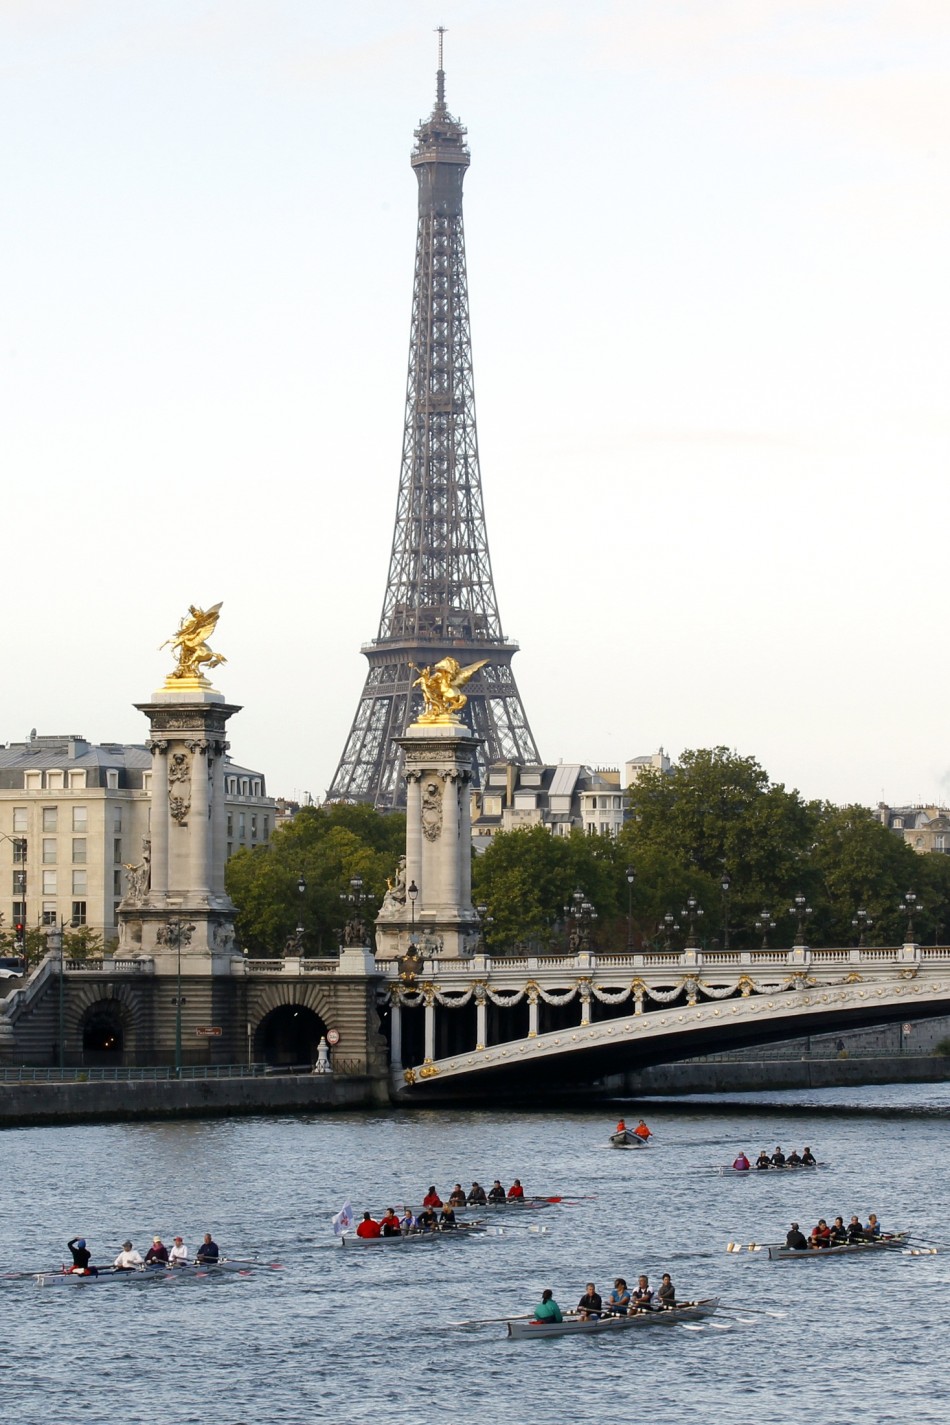 8  PARIS - Paris continues to lead the world in quality of infrastructure, transportation, lifestyle assets and economic reputation, but it falls behind in sustainability and ease of doing business.